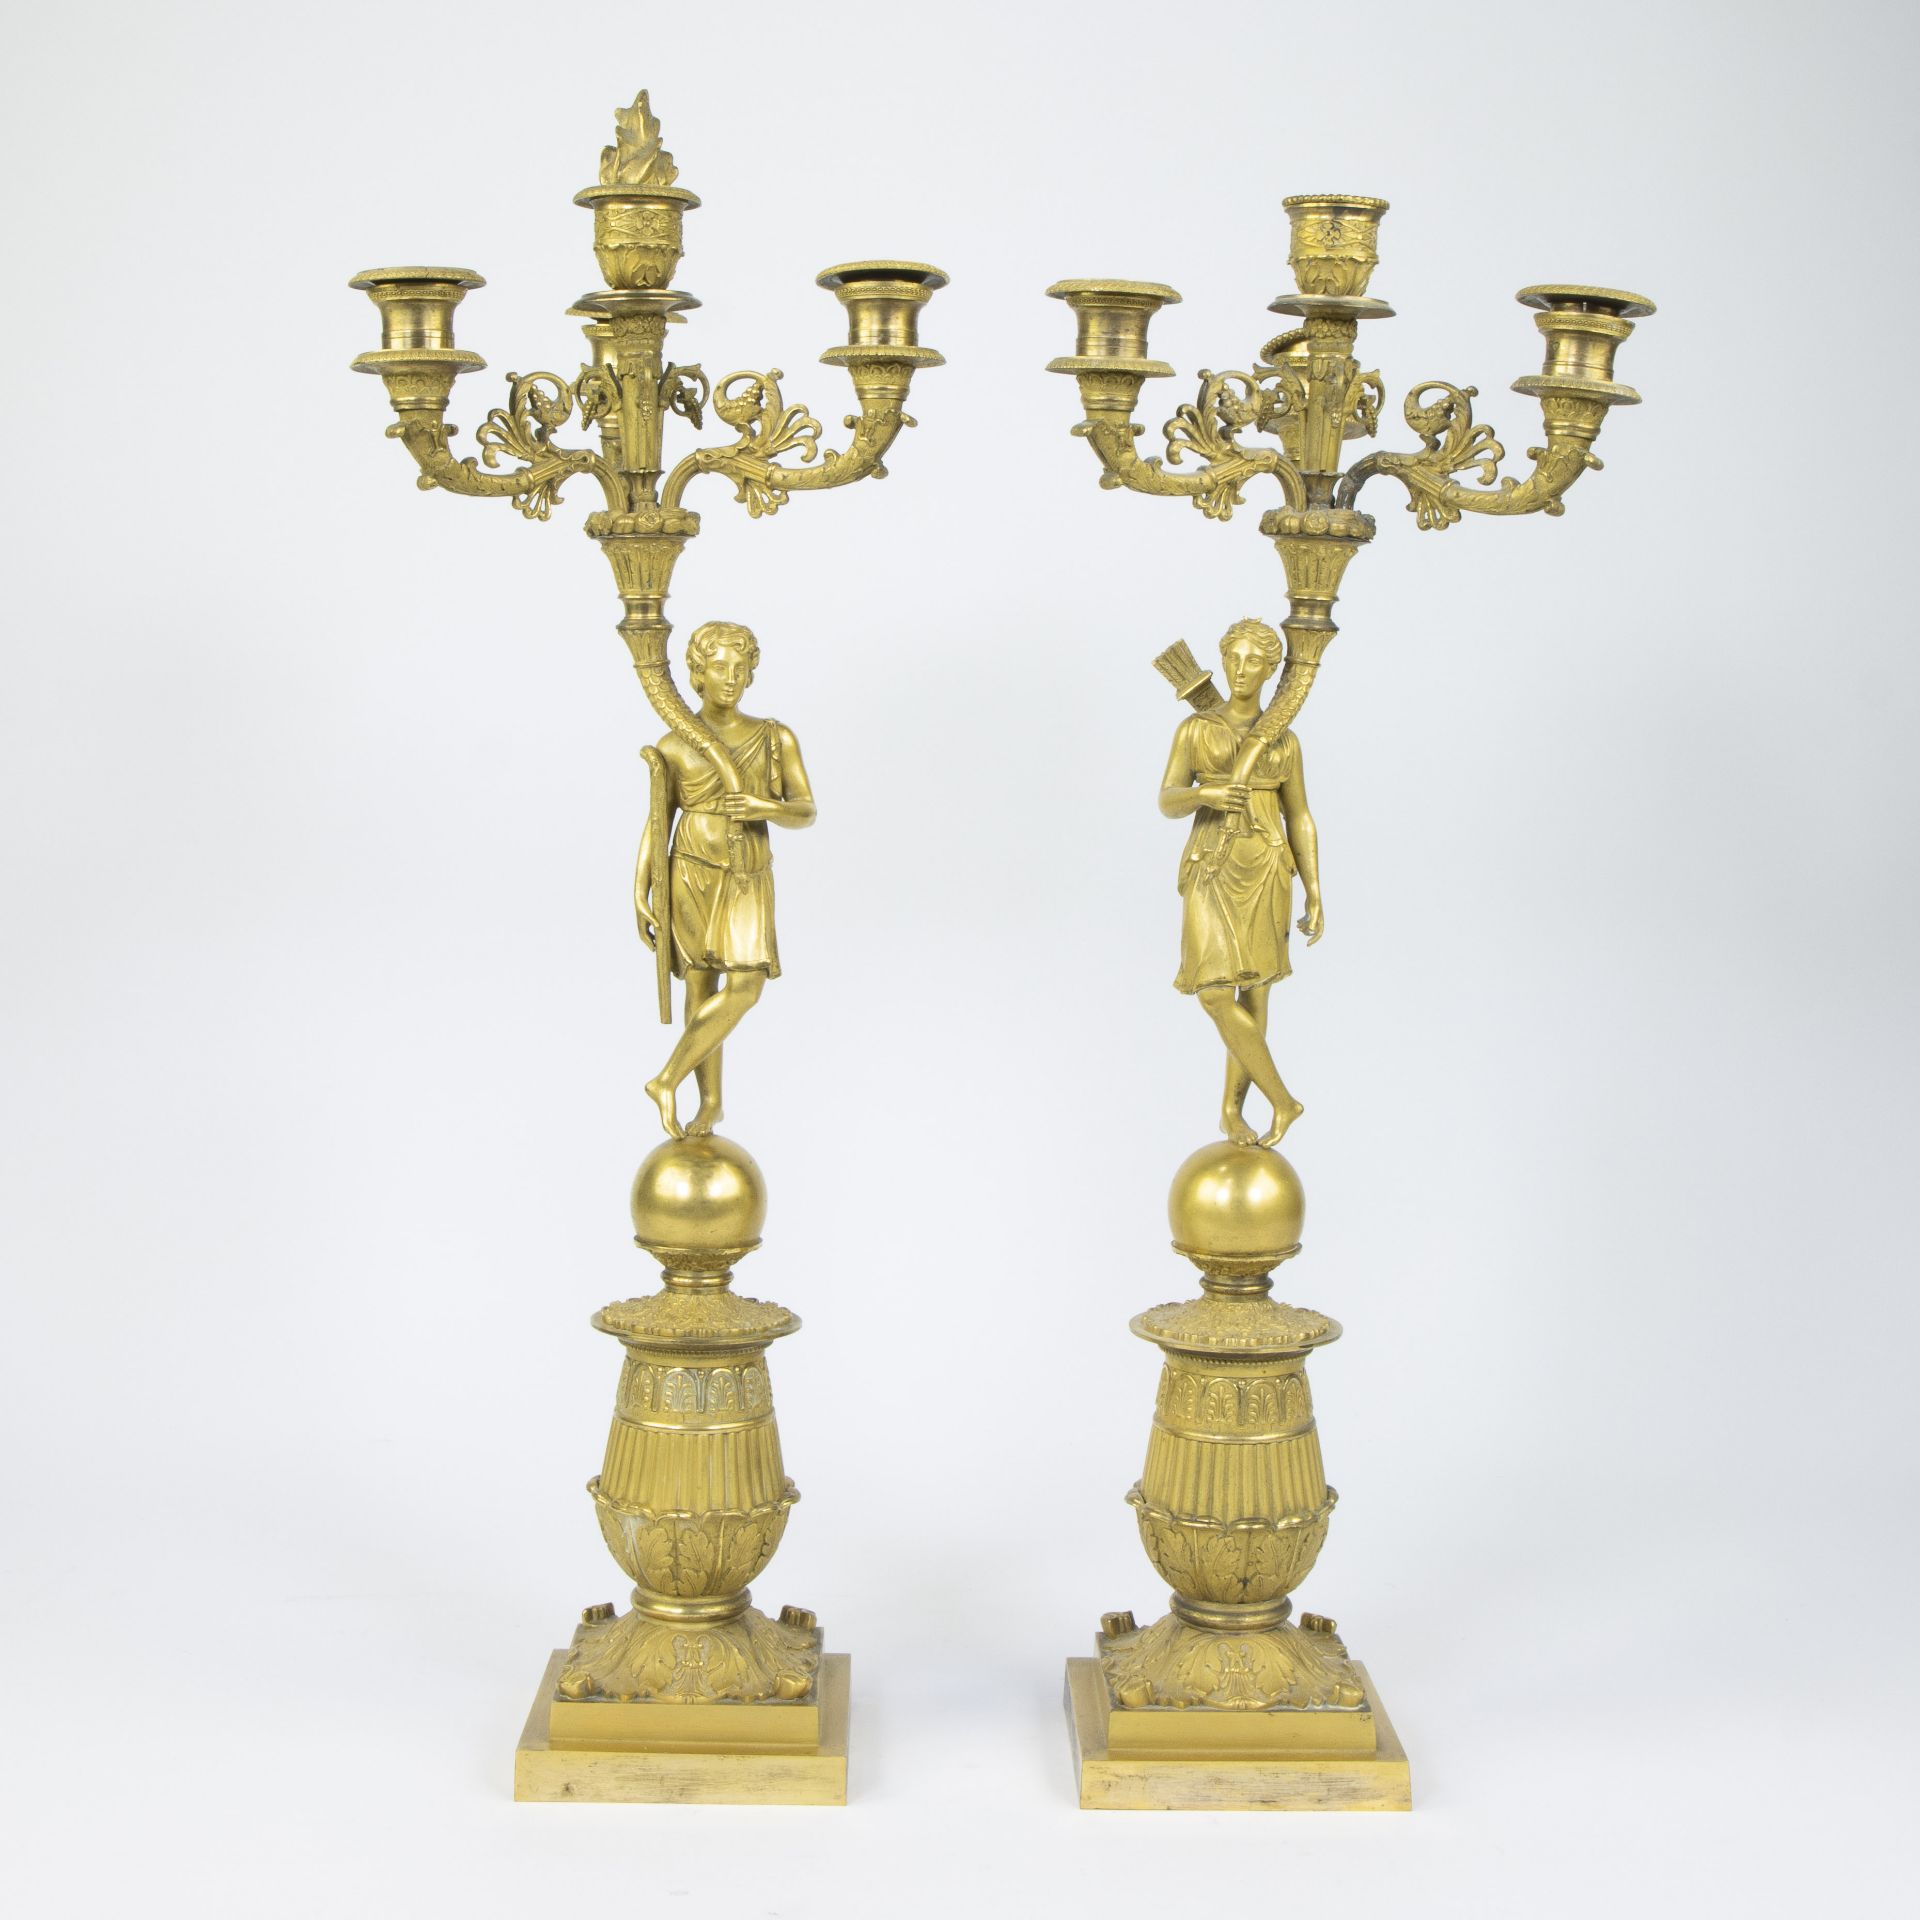 Pair of ormolu Empire candlesticks depicting Diana and Apollo, French, 19th century